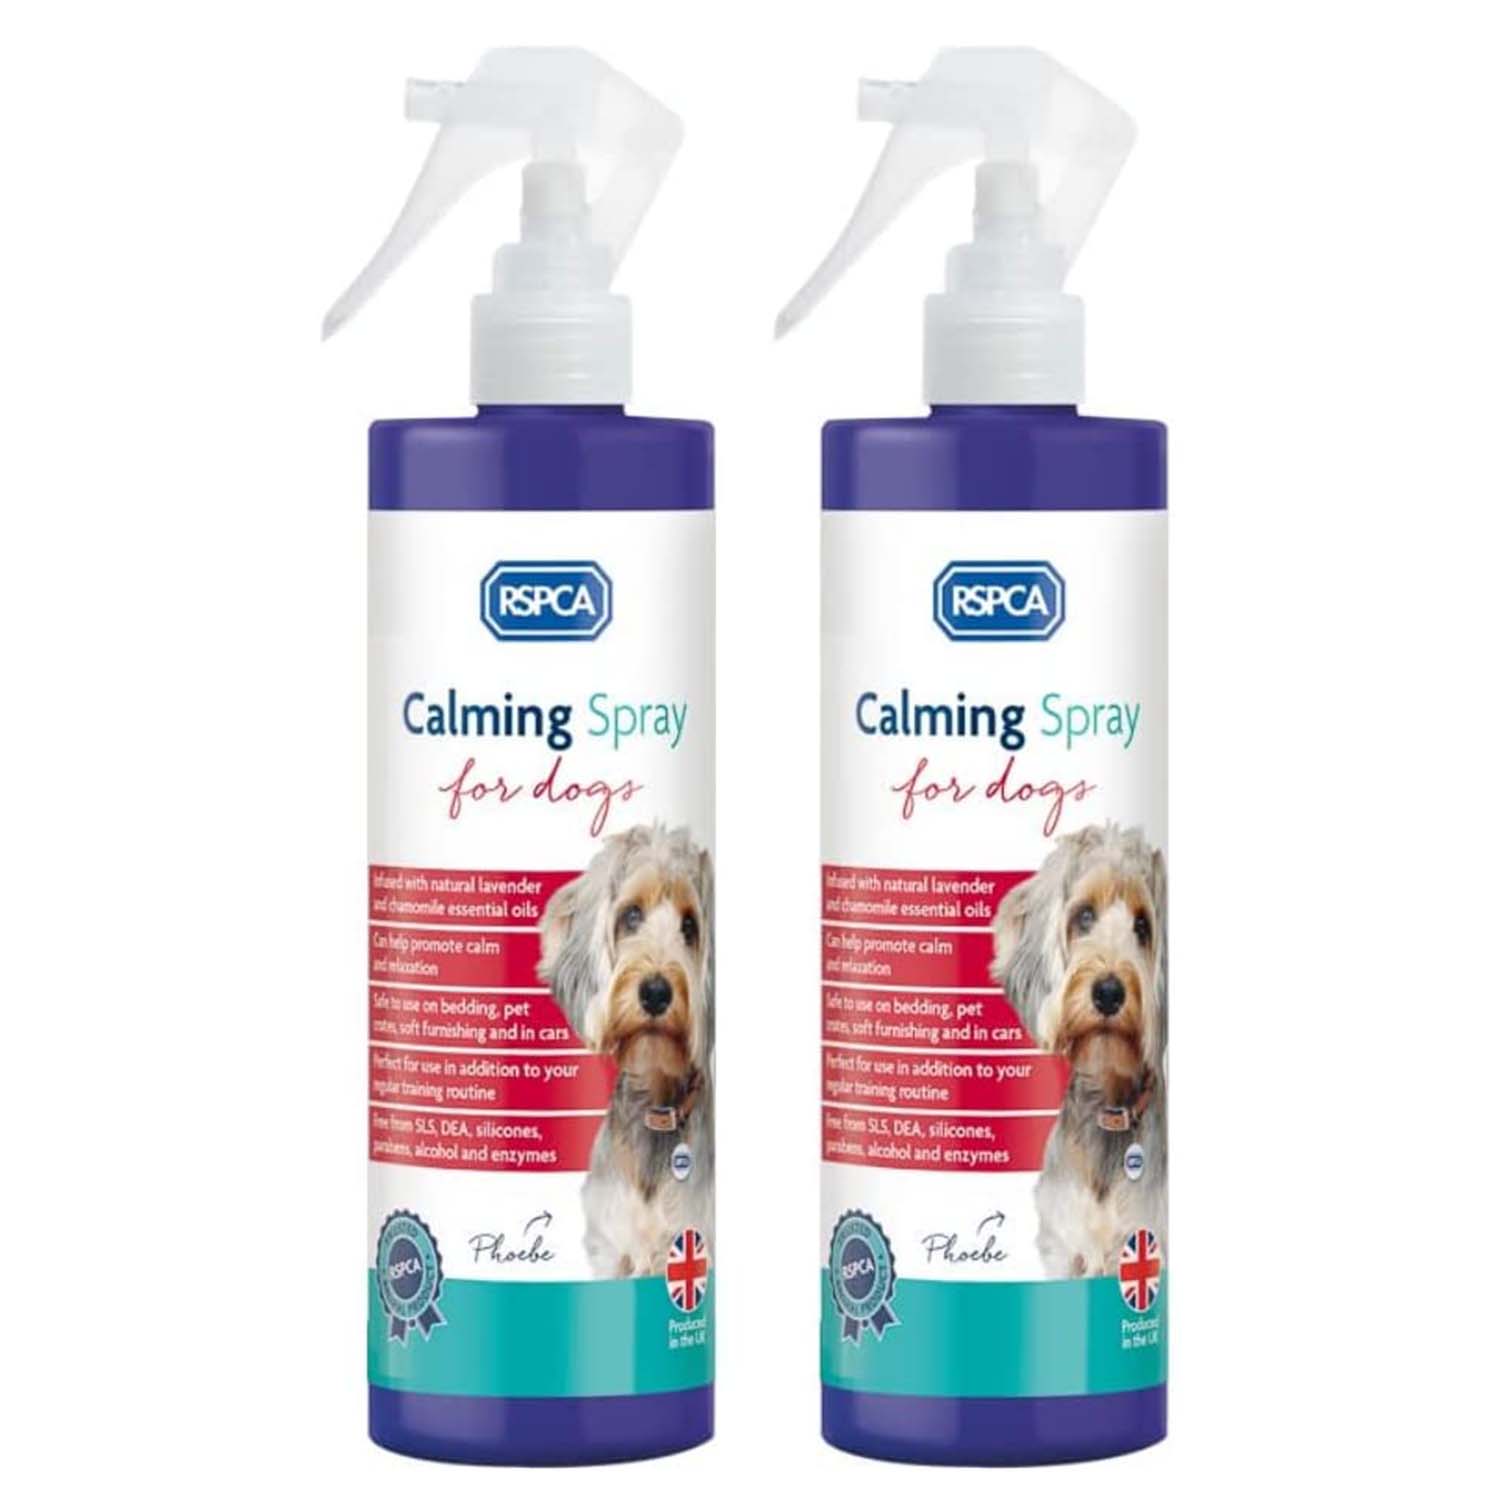 RSPCA Calming Bed Spray (for dogs) 2x250ml